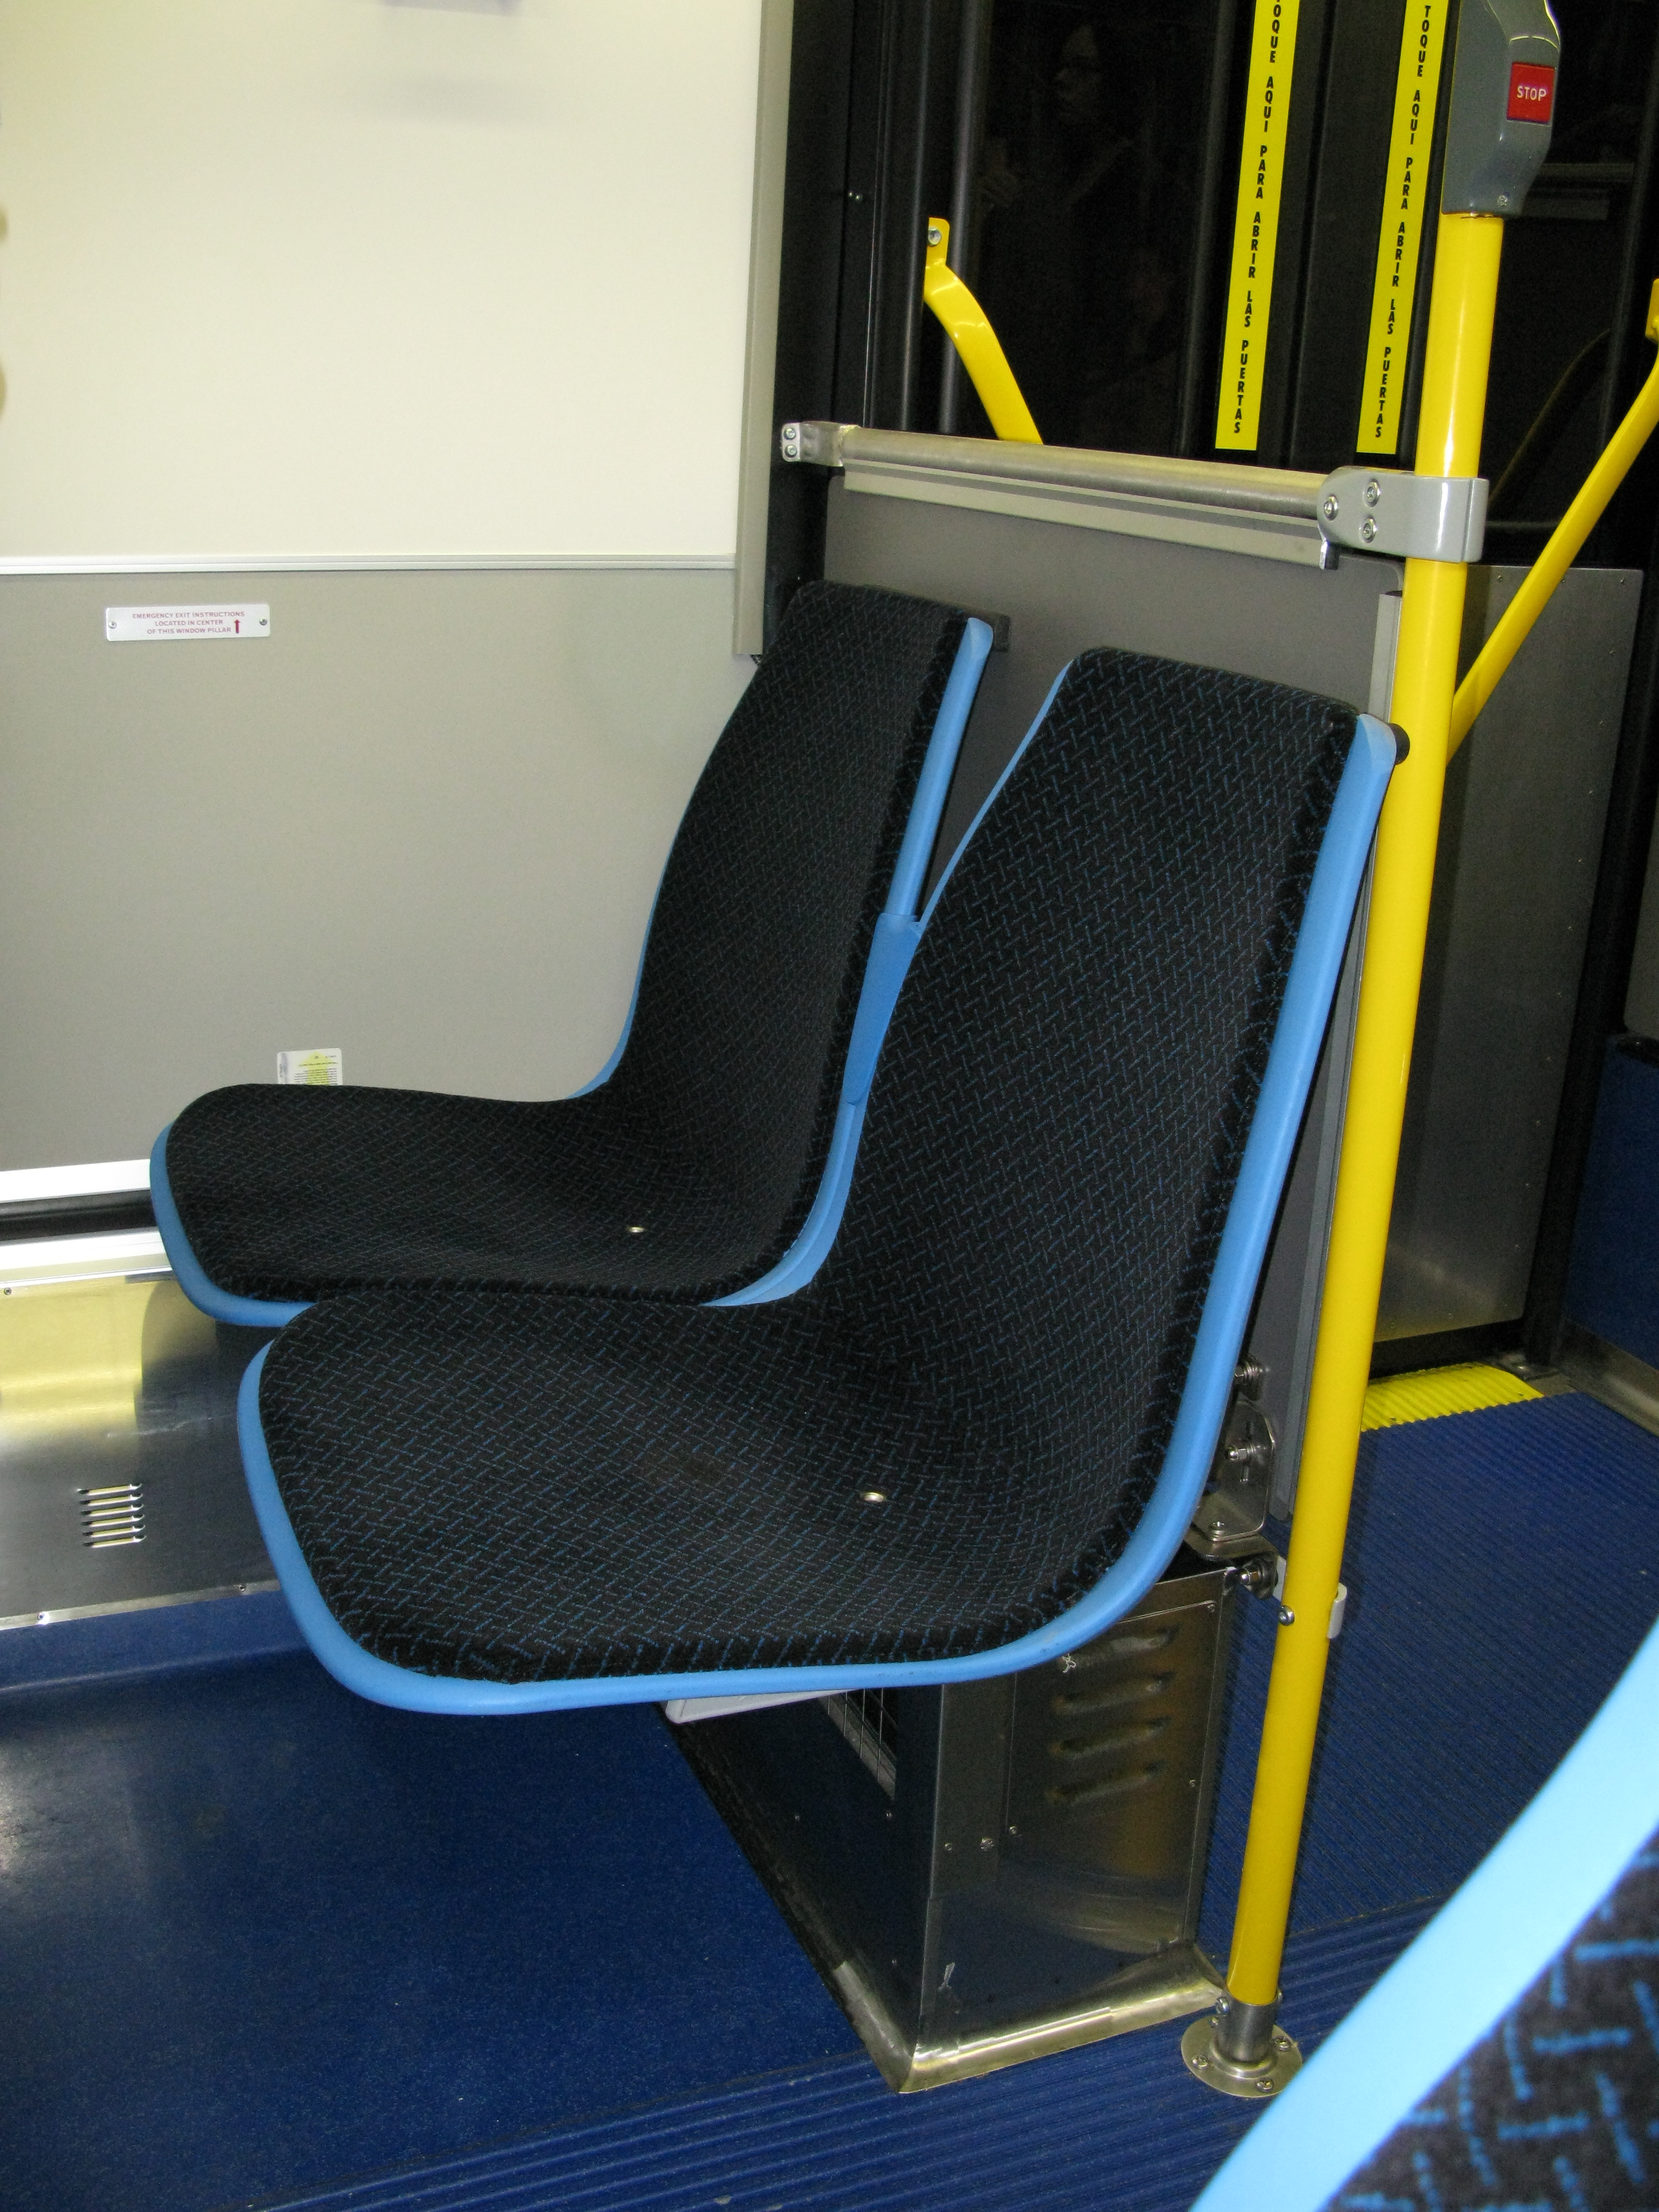 Bus seats. Special Seat Bus. Seat in a Bus. Tecnocraft t2 Seats.